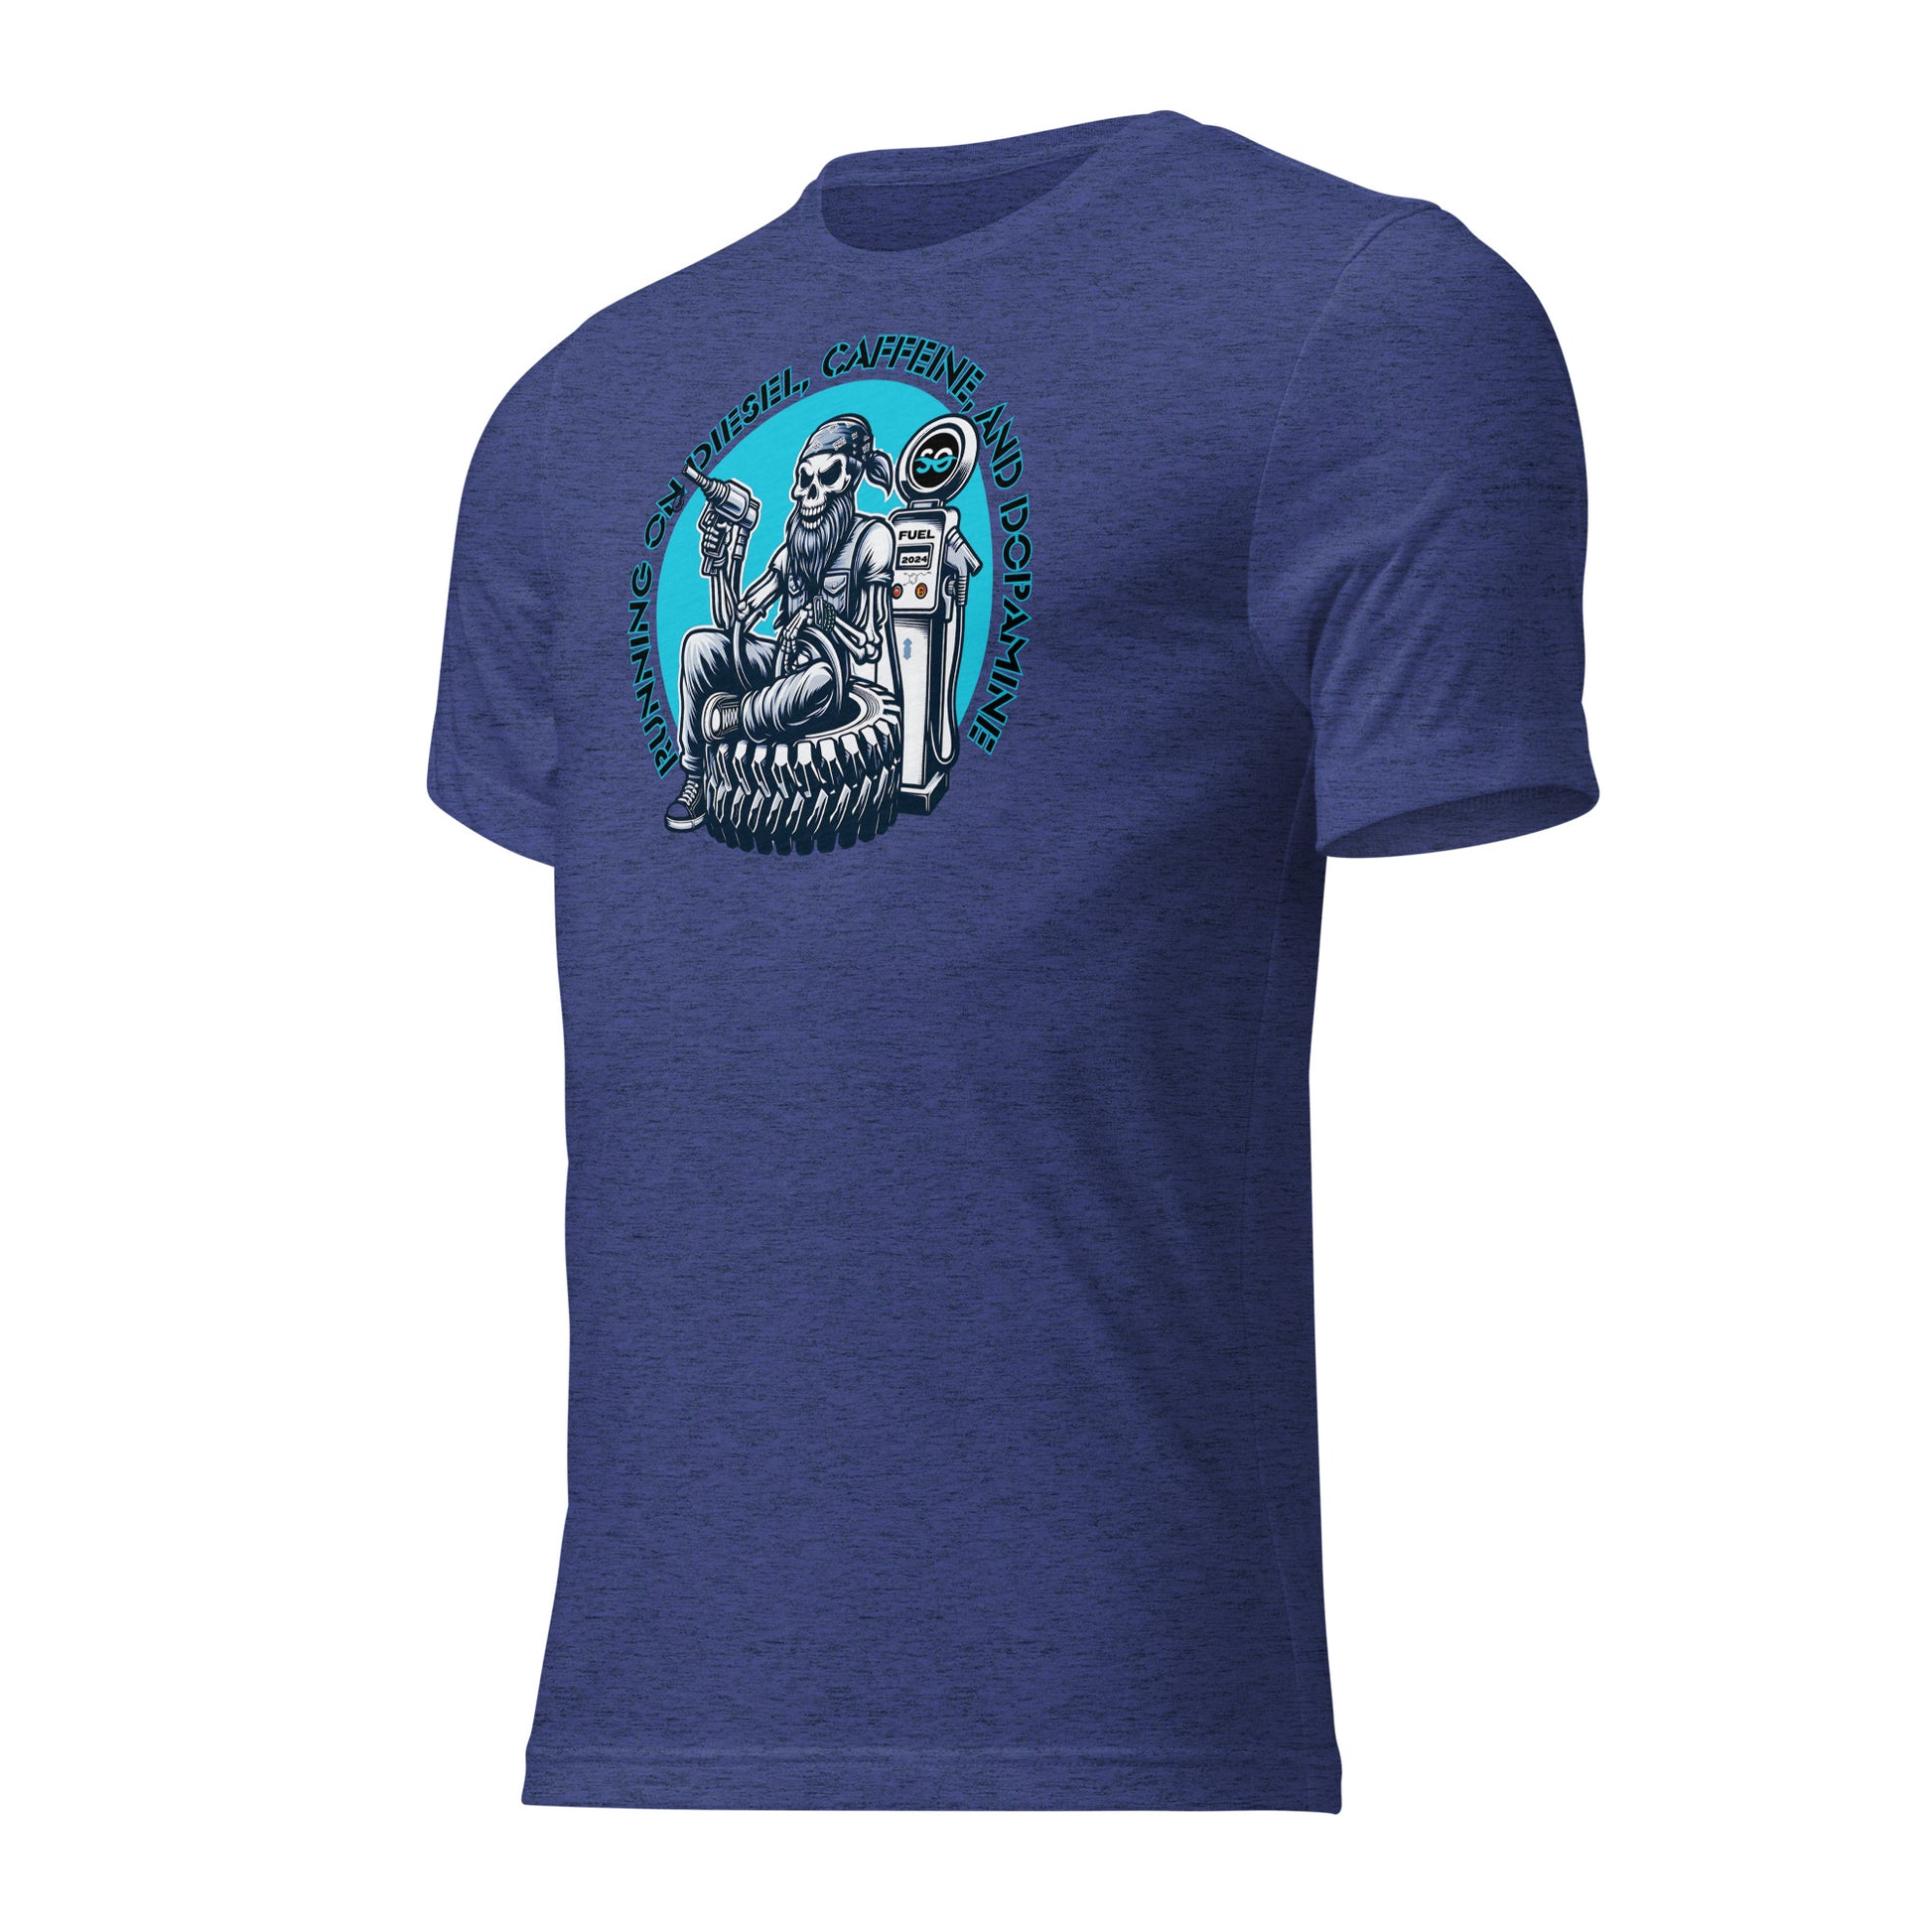 a blue t - shirt with a skeleton riding a motorcycle